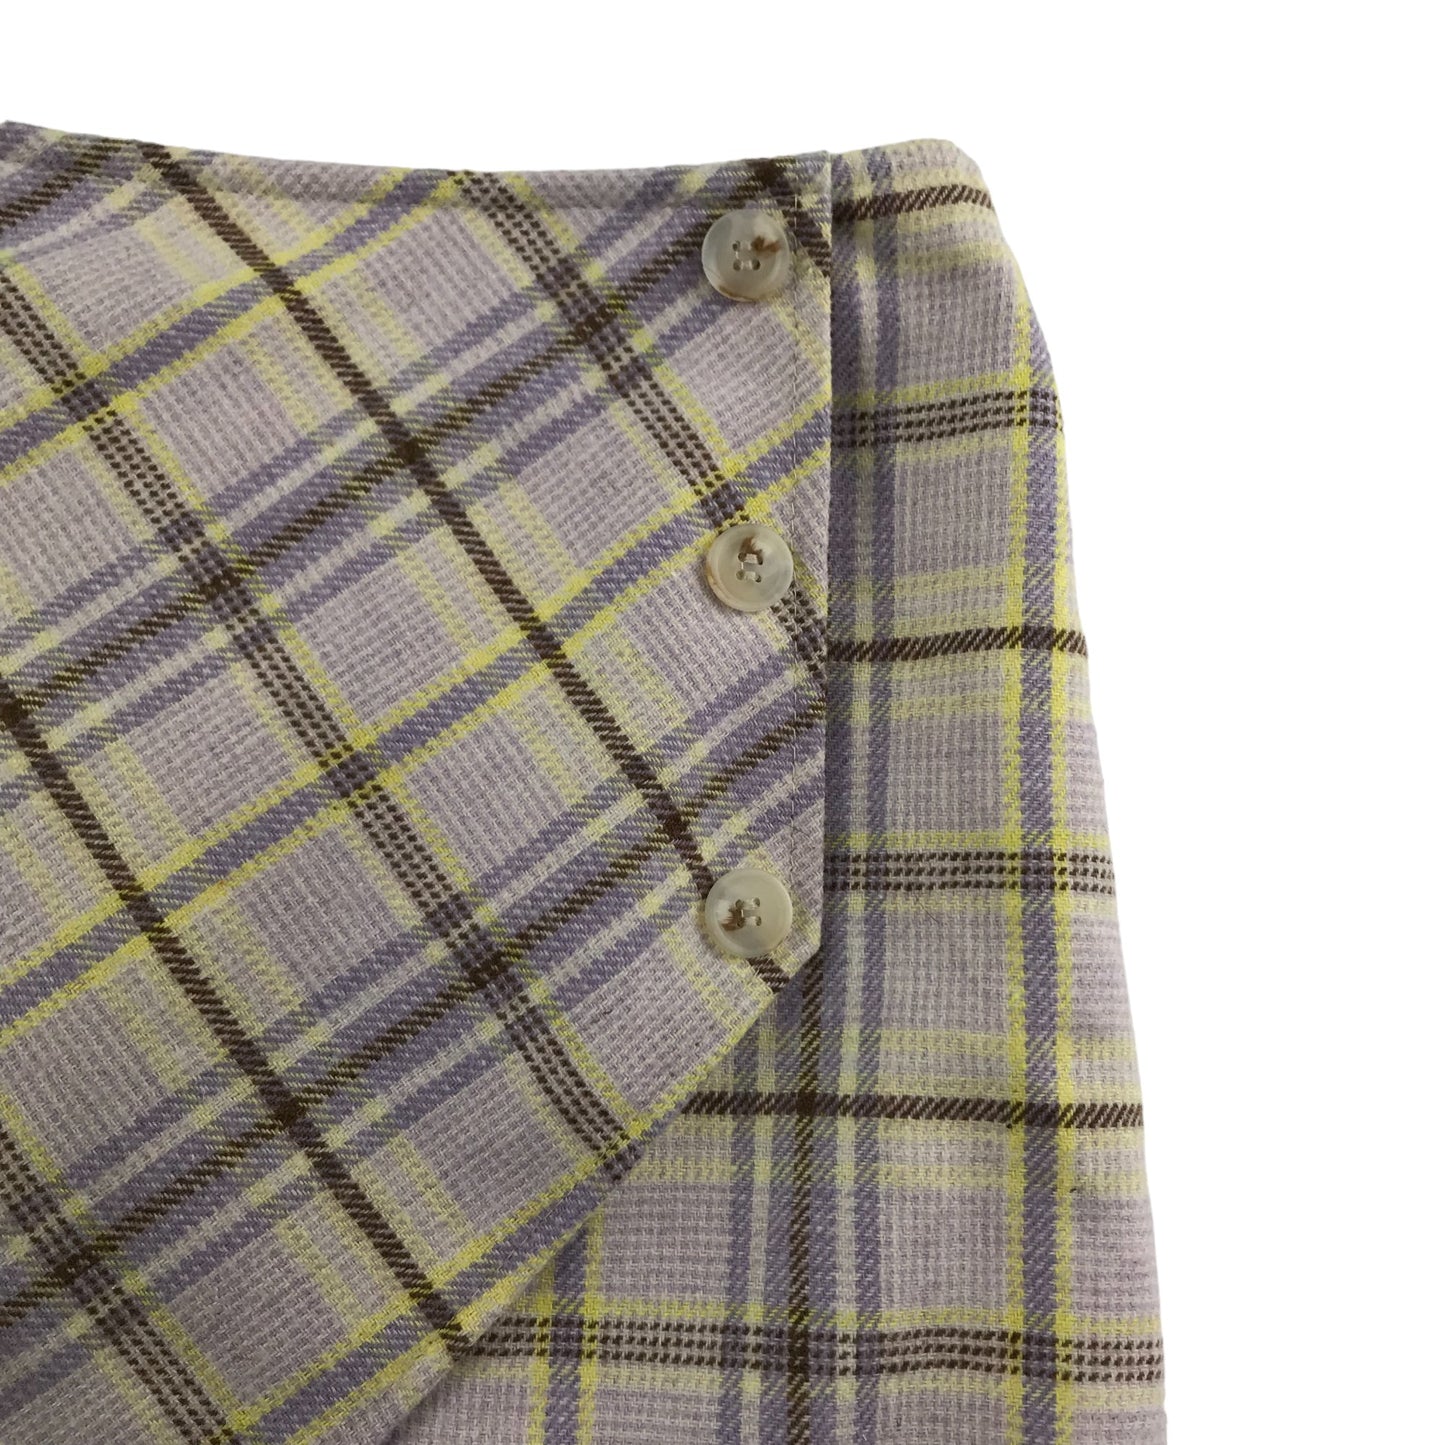 Tu Skirt Age 6 Yellow and Lilac Check Tweed-style